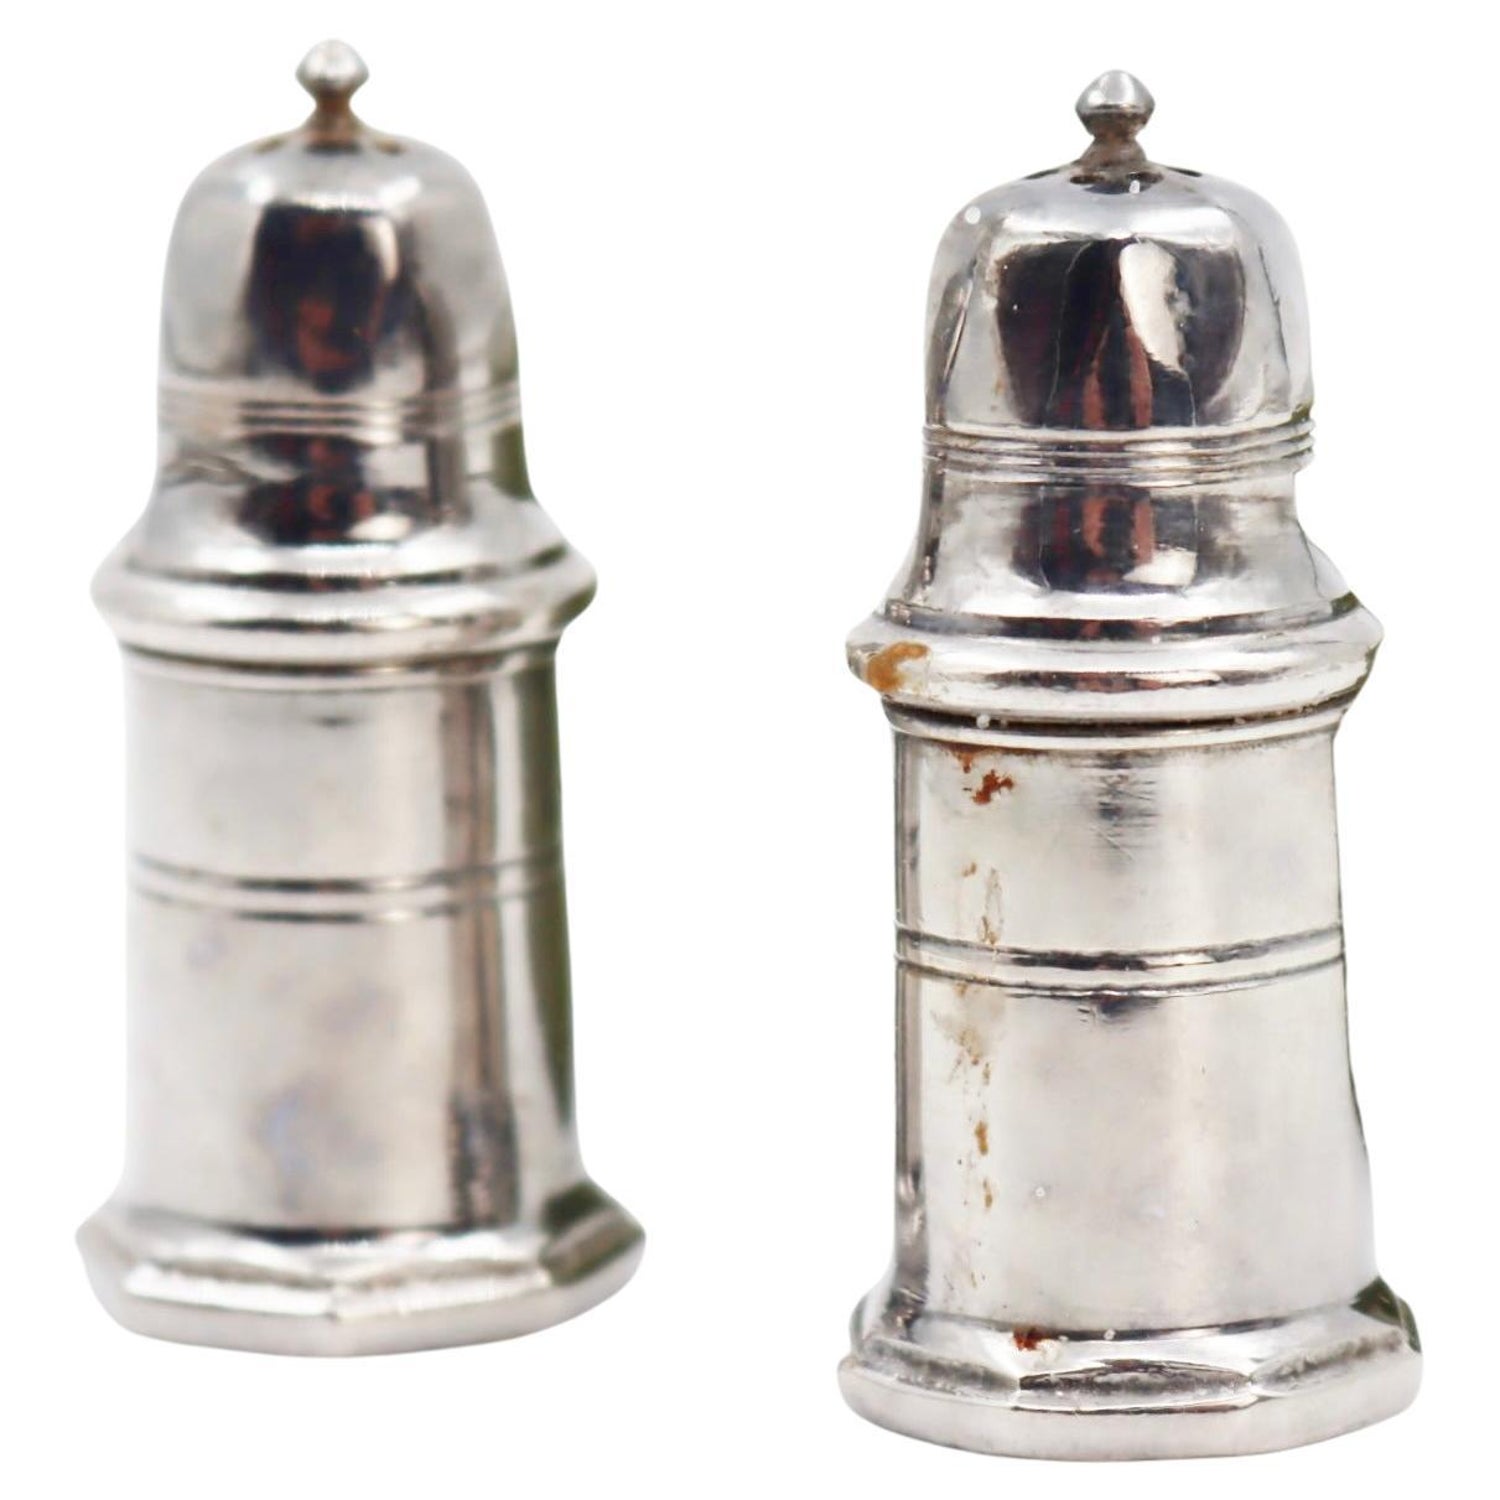 https://a.1stdibscdn.com/pair-of-saltcellar-and-pepperpot-christofle-house-20th-century-for-sale/f_15302/f_290158321654638421372/f_29015832_1654638421684_bg_processed.jpg?width=1500